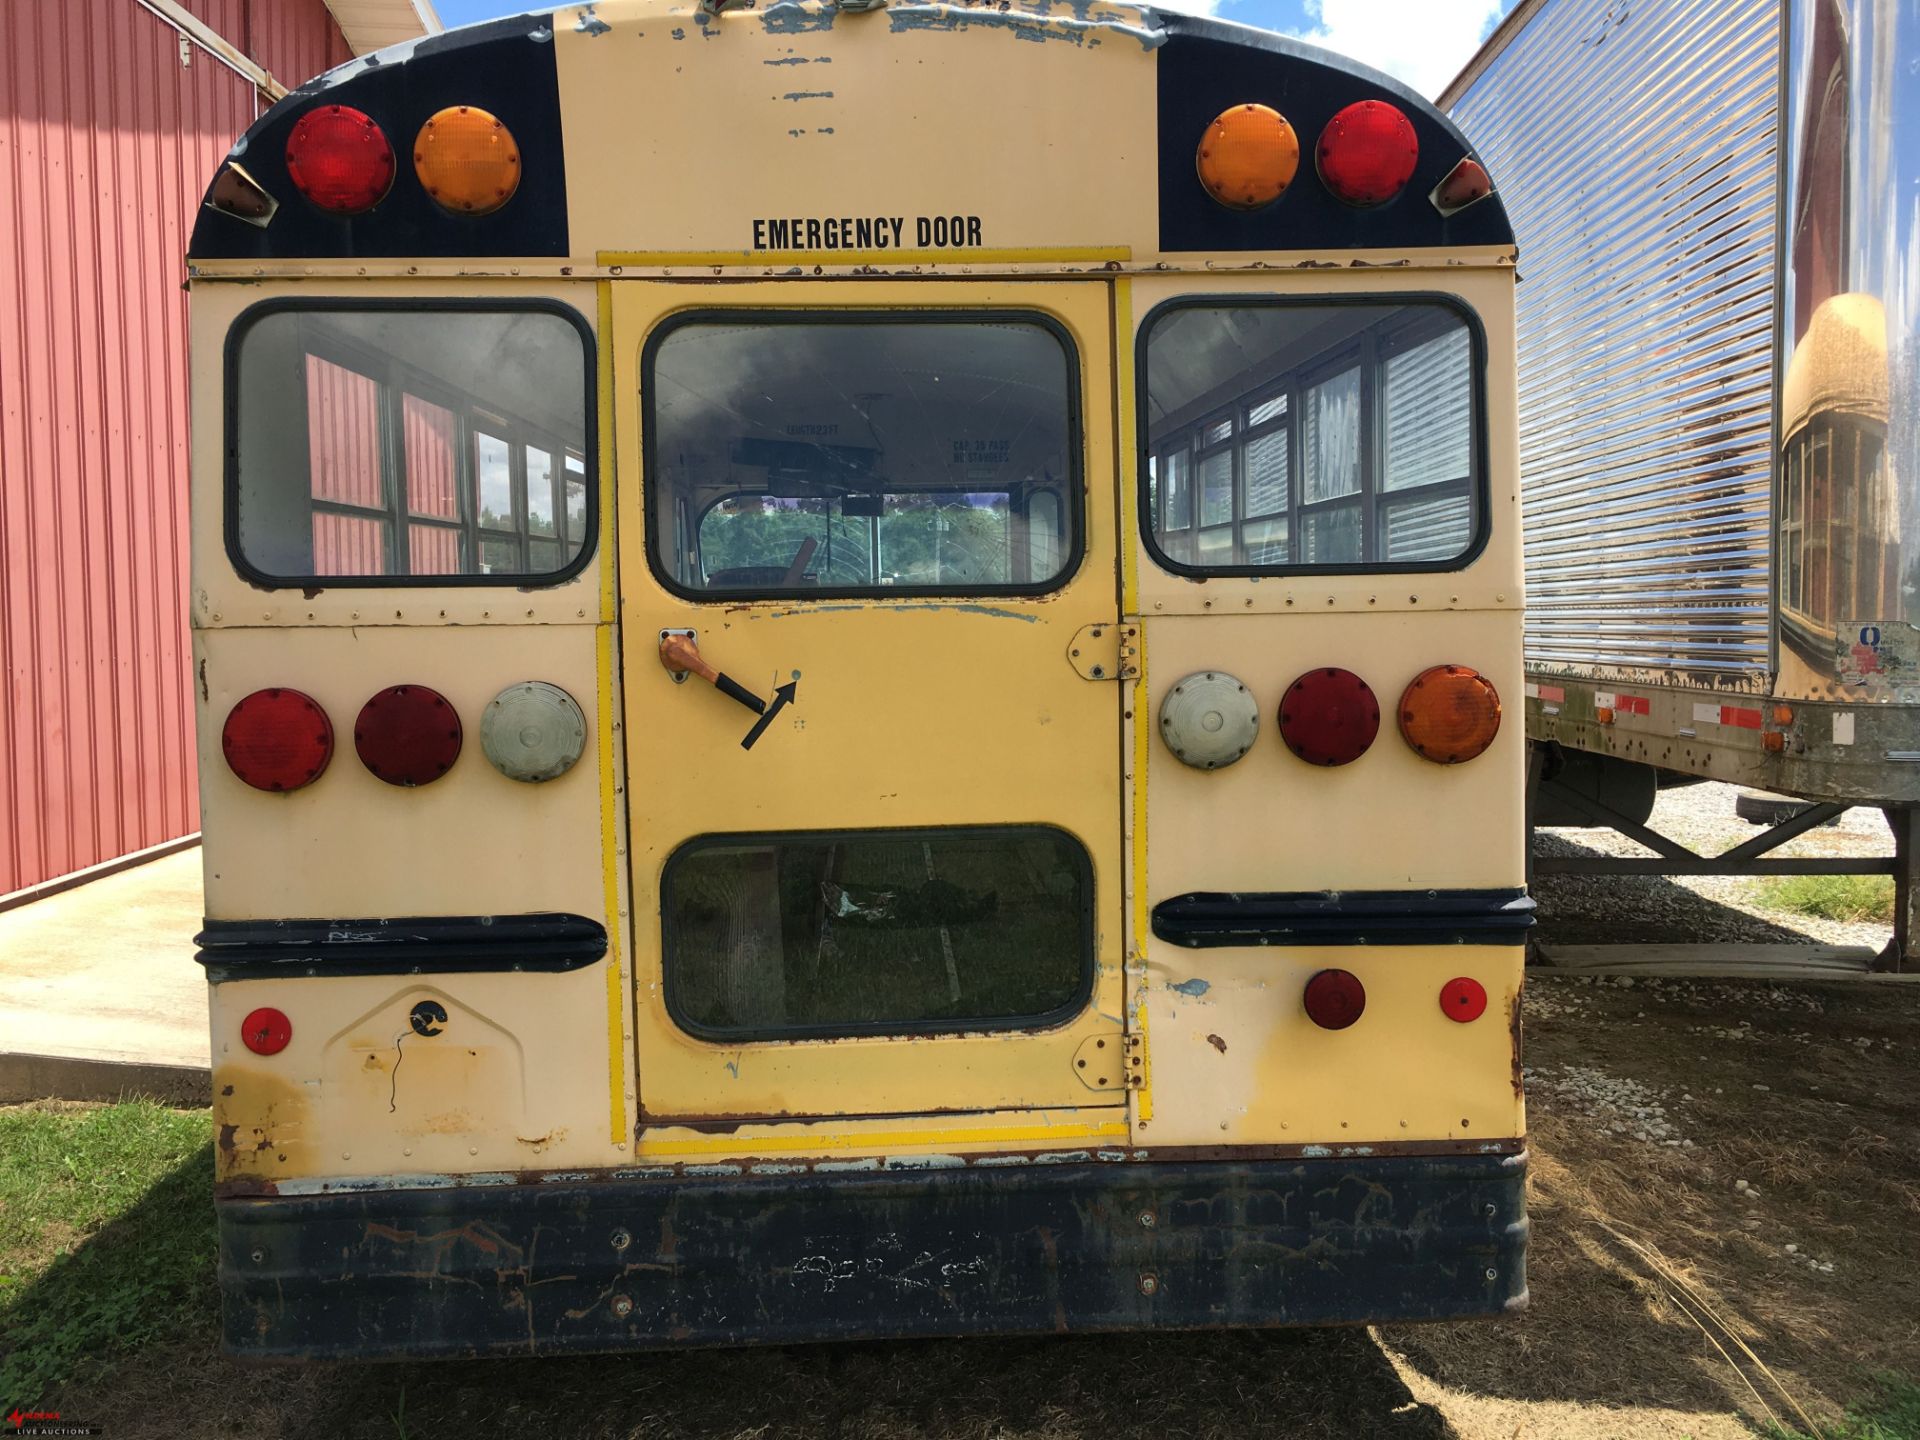 1993 CROWN MINI SCHOOL BUS, 350, AUTOMATIC, BEEN SITTING FOR A LONG TIME, DINGS/SCRATCHES/DENTS/ - Image 4 of 11